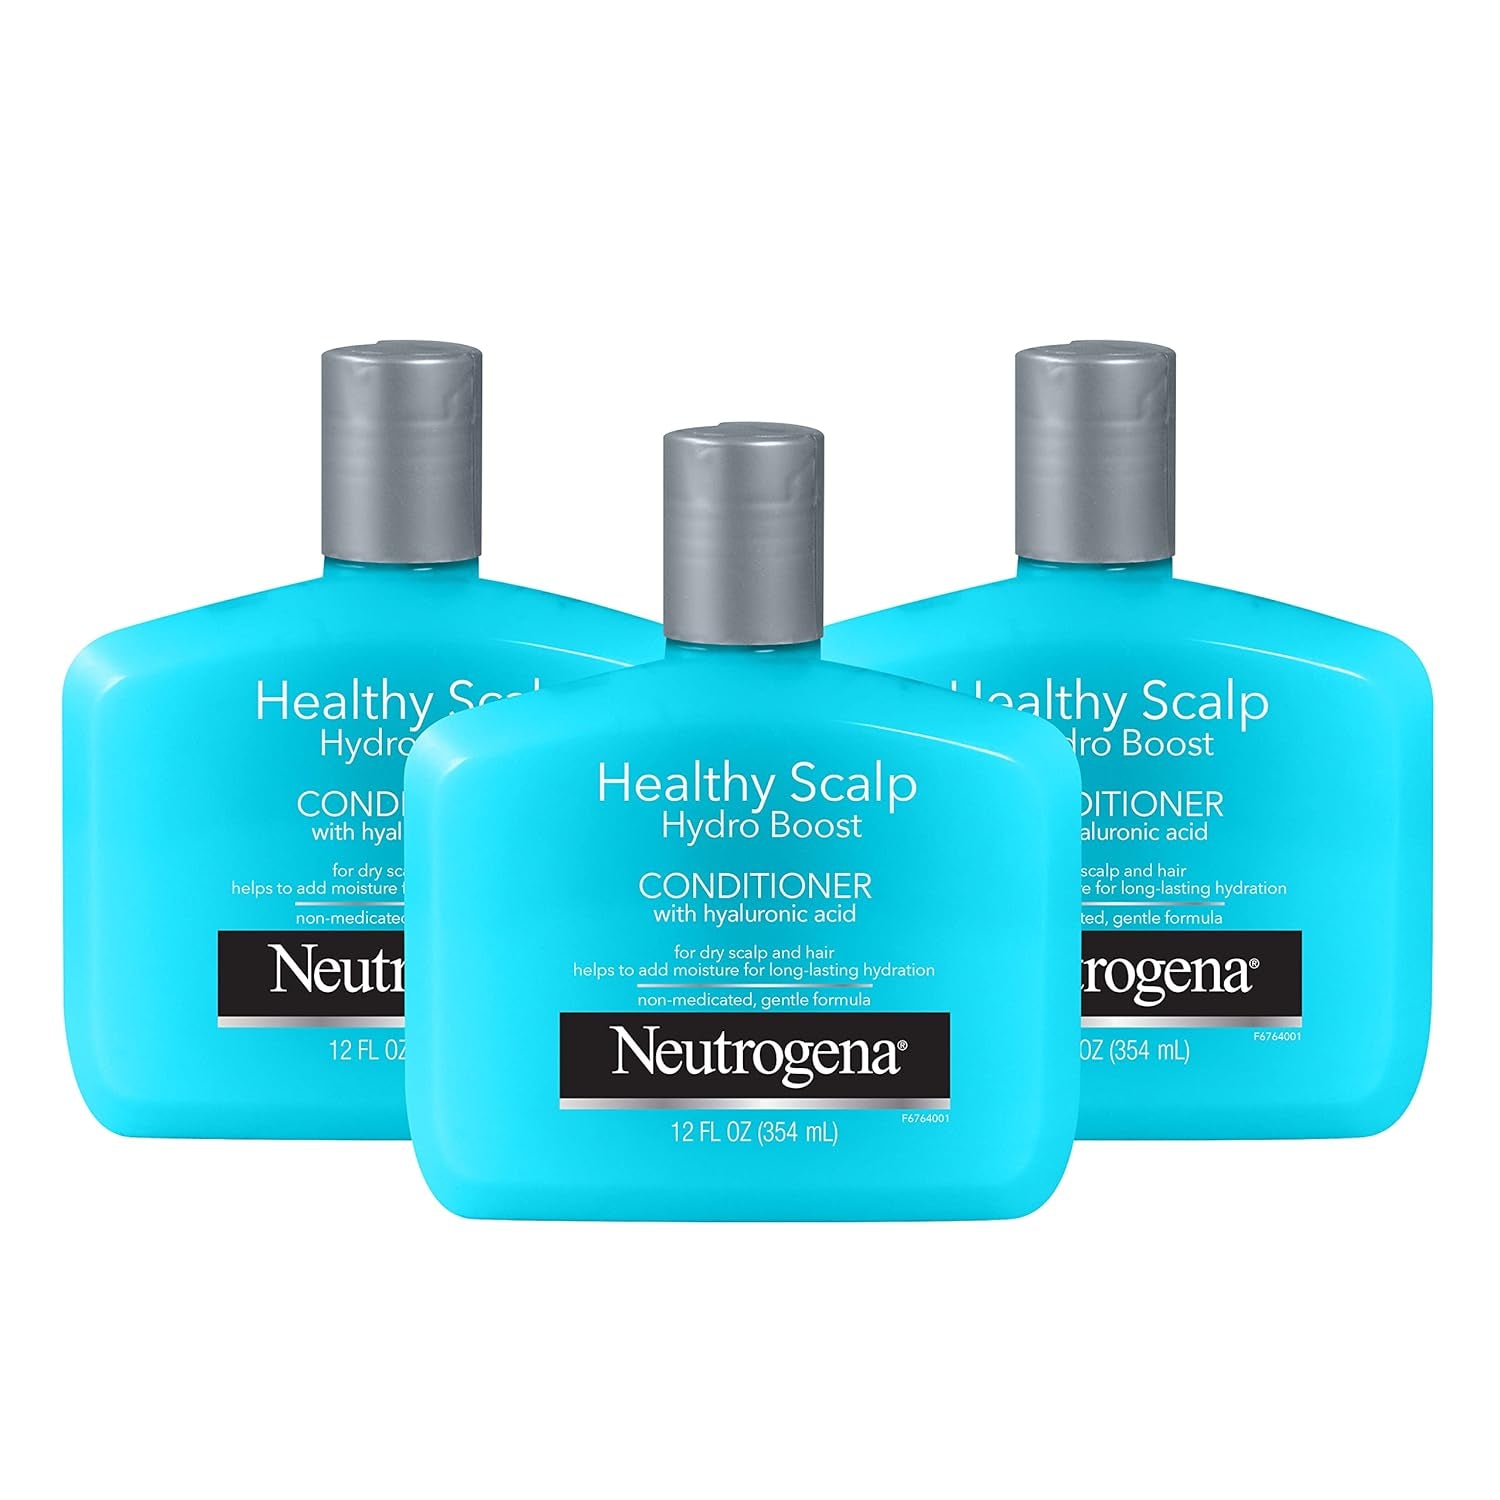 Neutrogena Moisturizing Healthy Scalp Hydro Boost Conditioner for Dry Hair and Scalp, with Hydrating Hyaluronic Acid, Ph-Balanced, Paraben & Phthalate-Free, Color-Safe, 12 Fl Oz (Pack of 3)